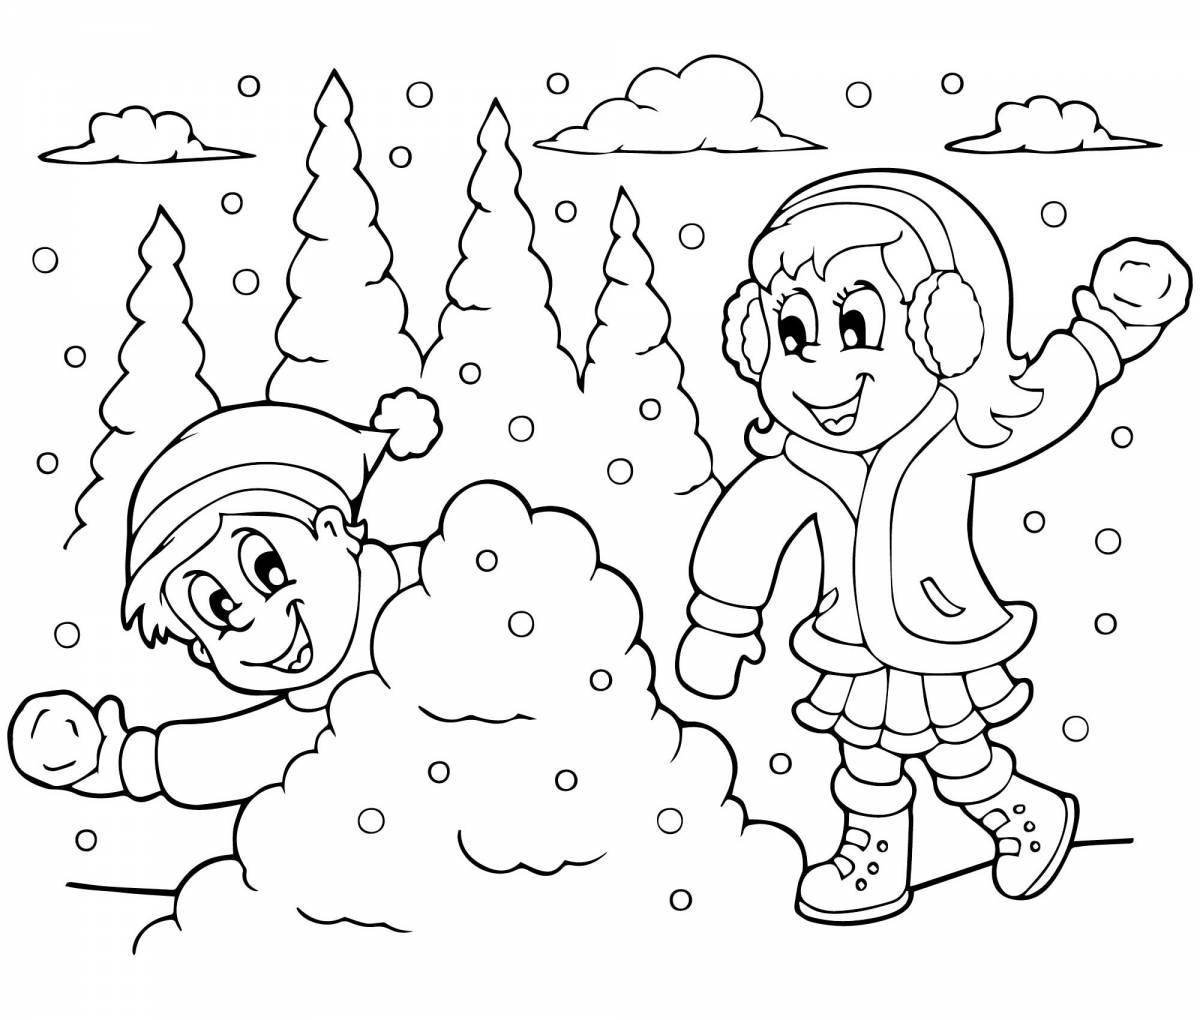 Sparkling winter day coloring page for kids